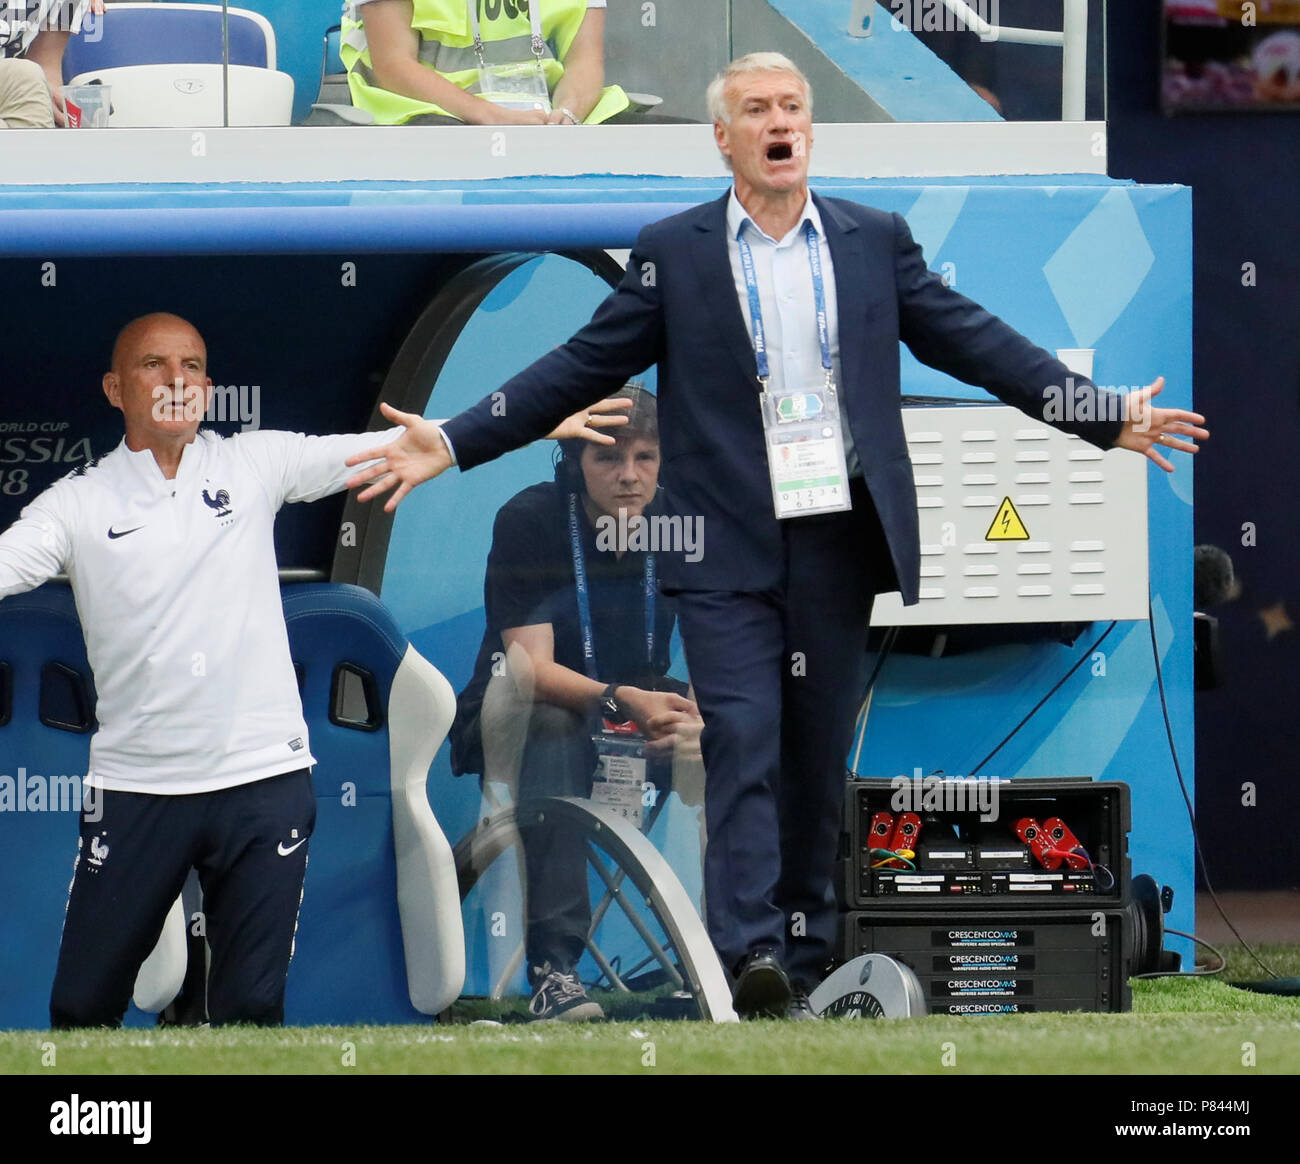 NIZHNY NOVGOROD, RUSSIA - JULY 6: France national team head coach Didier Deschamps (R) reacts during the 2018 FIFA World Cup Russia Quarter Final match between Uruguay and France at Nizhny Novgorod Stadium on July 6, 2018 in Nizhny Novgorod, Russia. (MB Media) Stock Photo